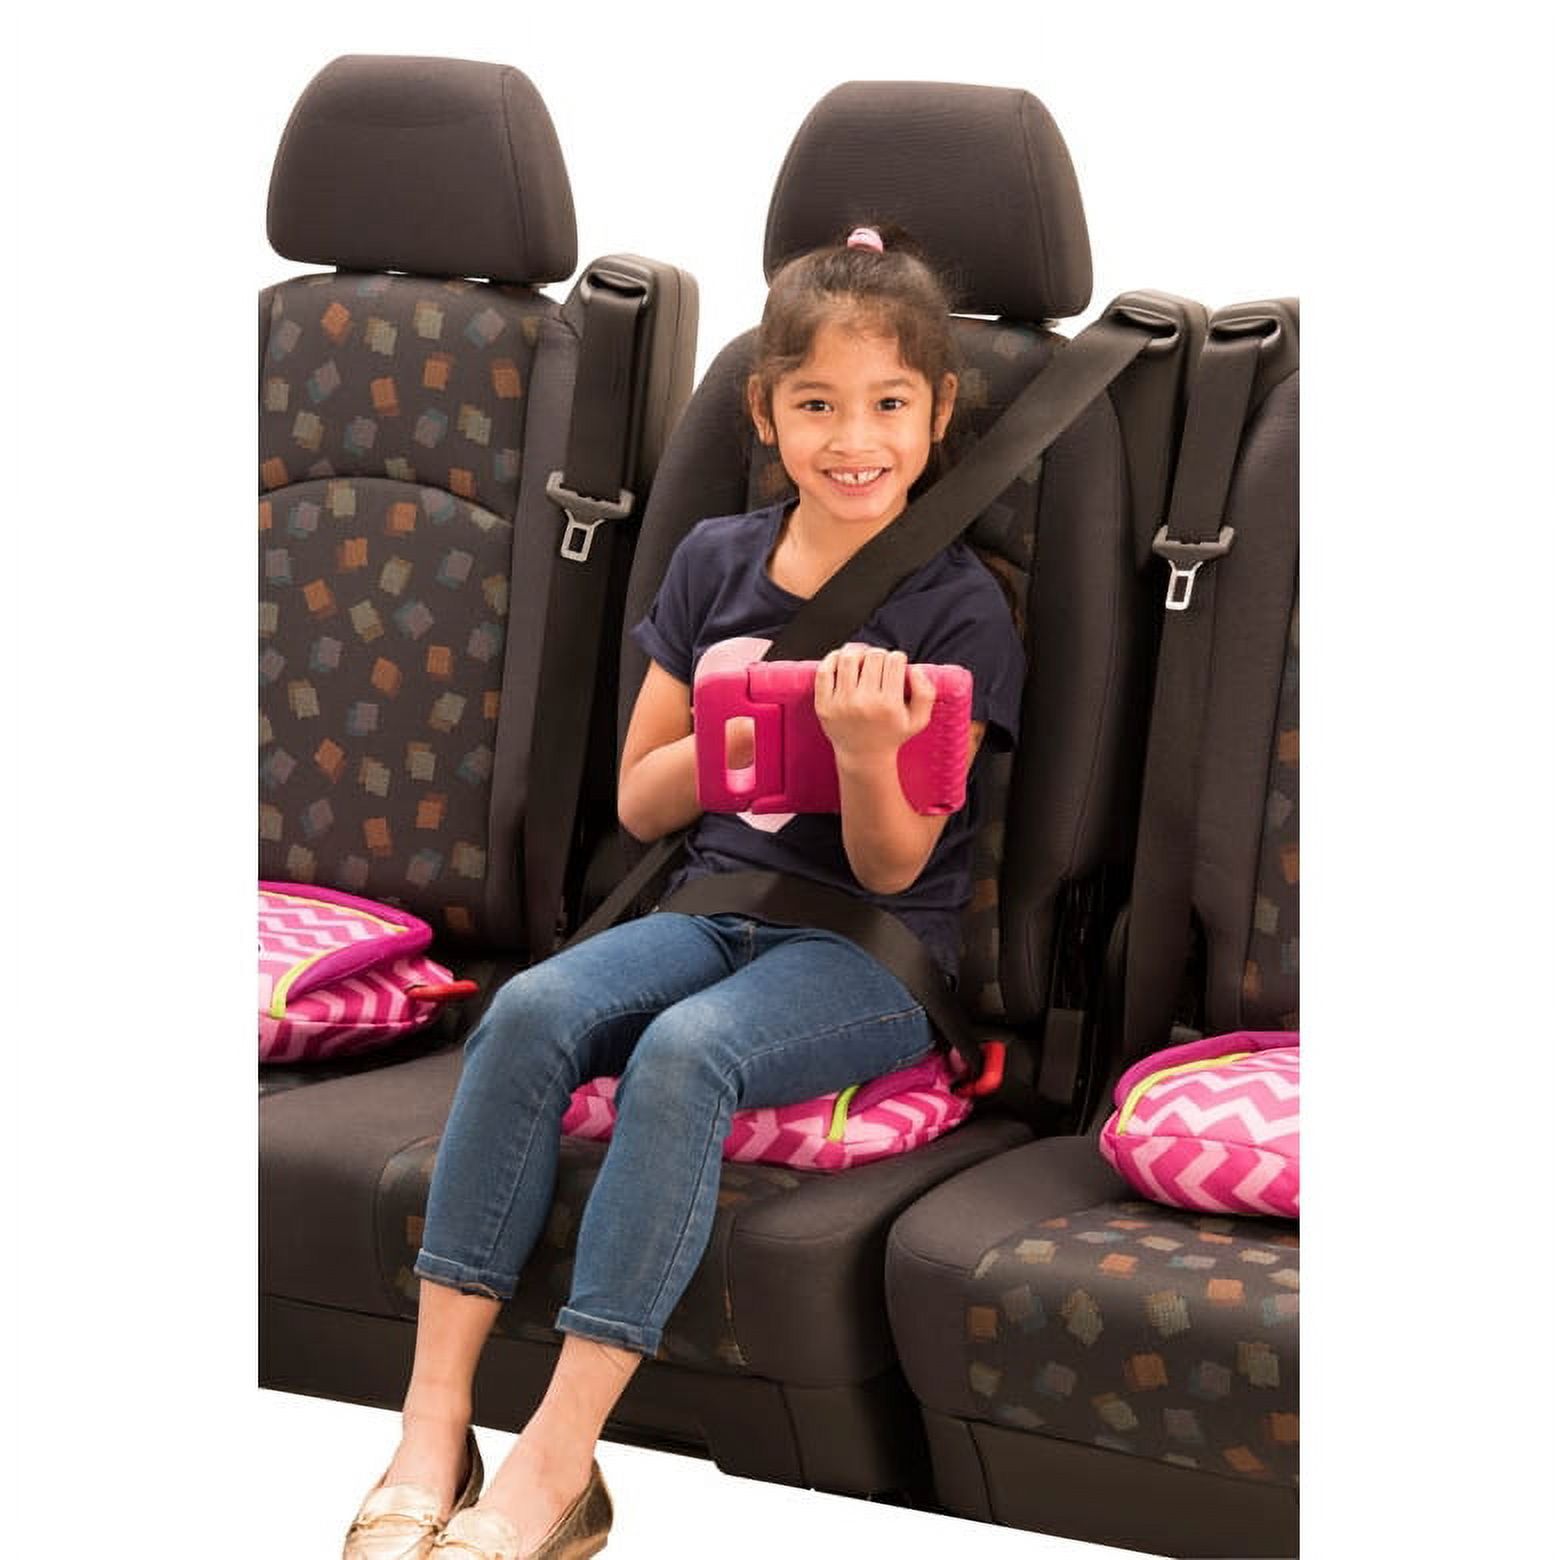 Bubblebum Backless Booster Car Seat, Black - image 5 of 7